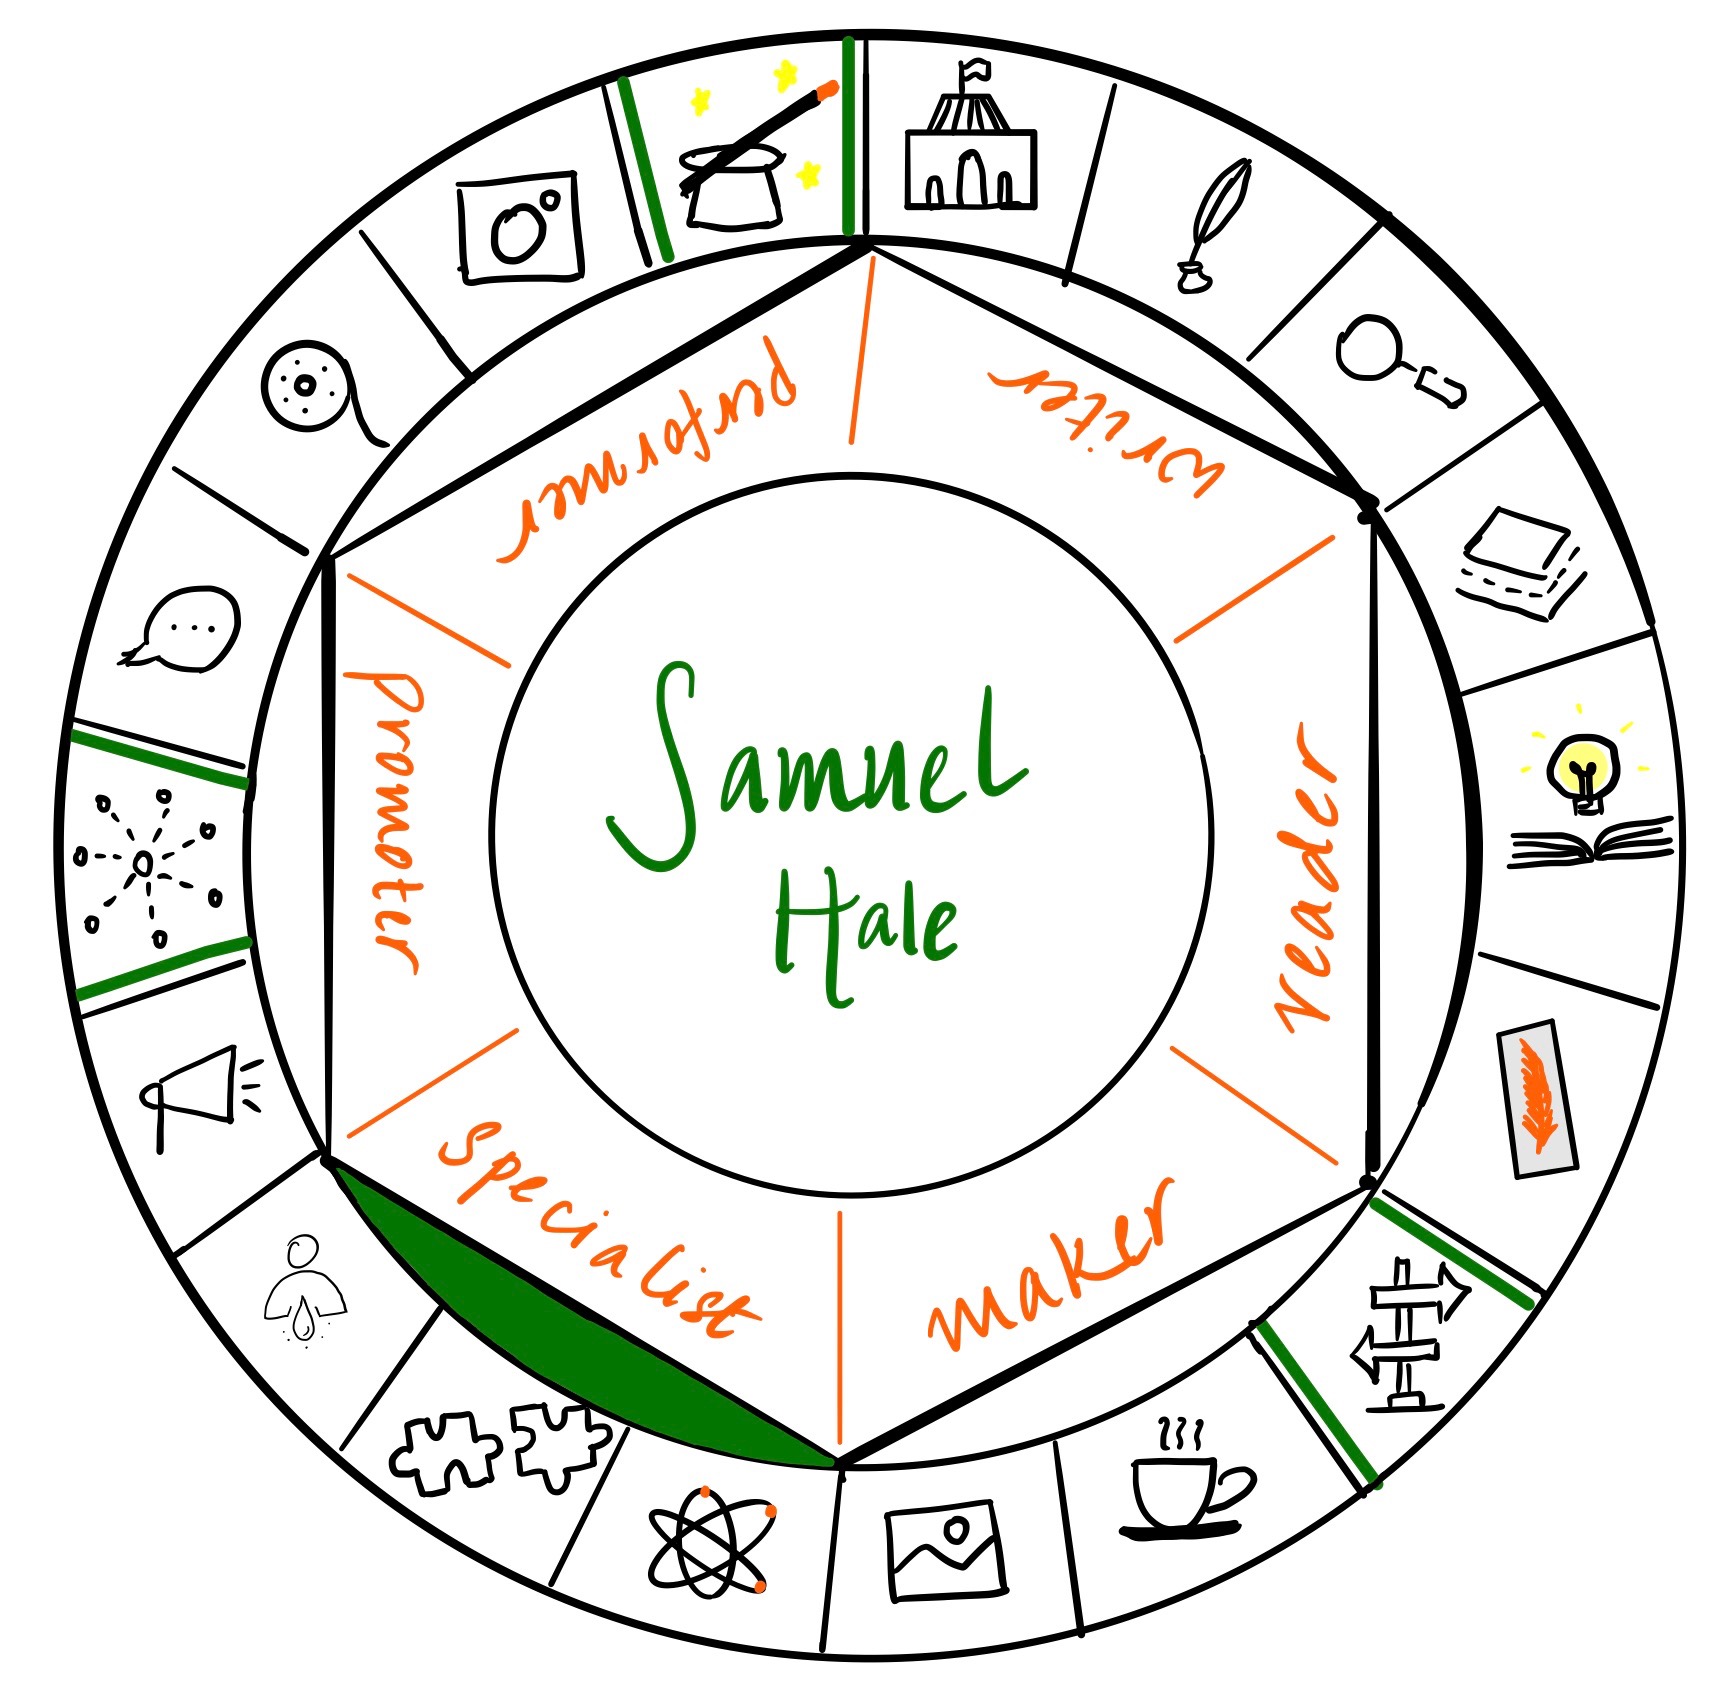 Samuel Hale is a specialist. It's a pleasure to have him over on The Creator's Roulette to talk about historical fantasy and historical fiction. There is so much to learn in this post!